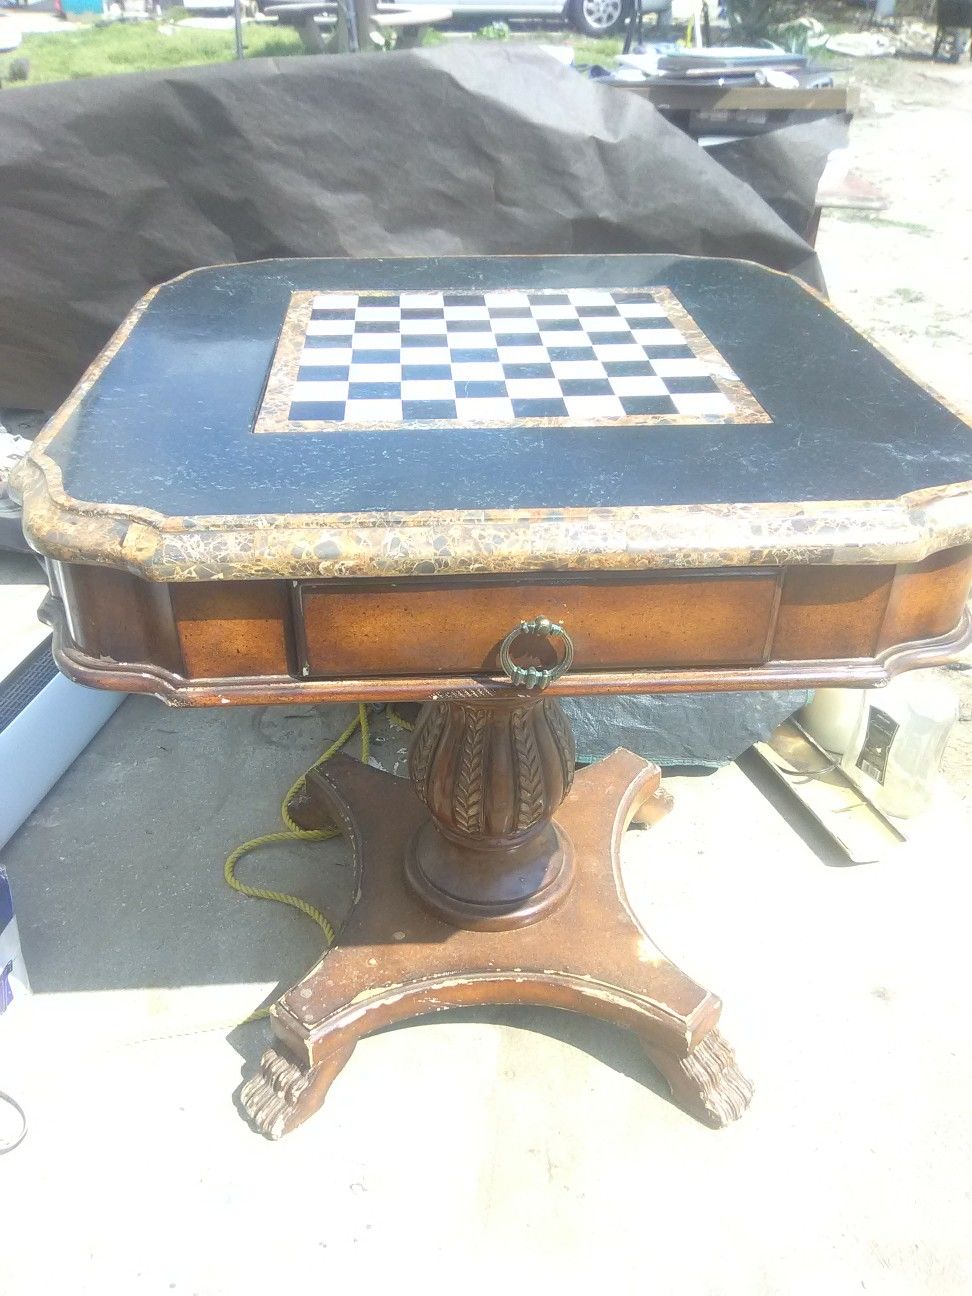 FINAL DROPPED PRICE PERIGOLD HERITAGE ANTIQUE PEDESTAL GAME TABLE *NEEDS RESTORATION*!!!